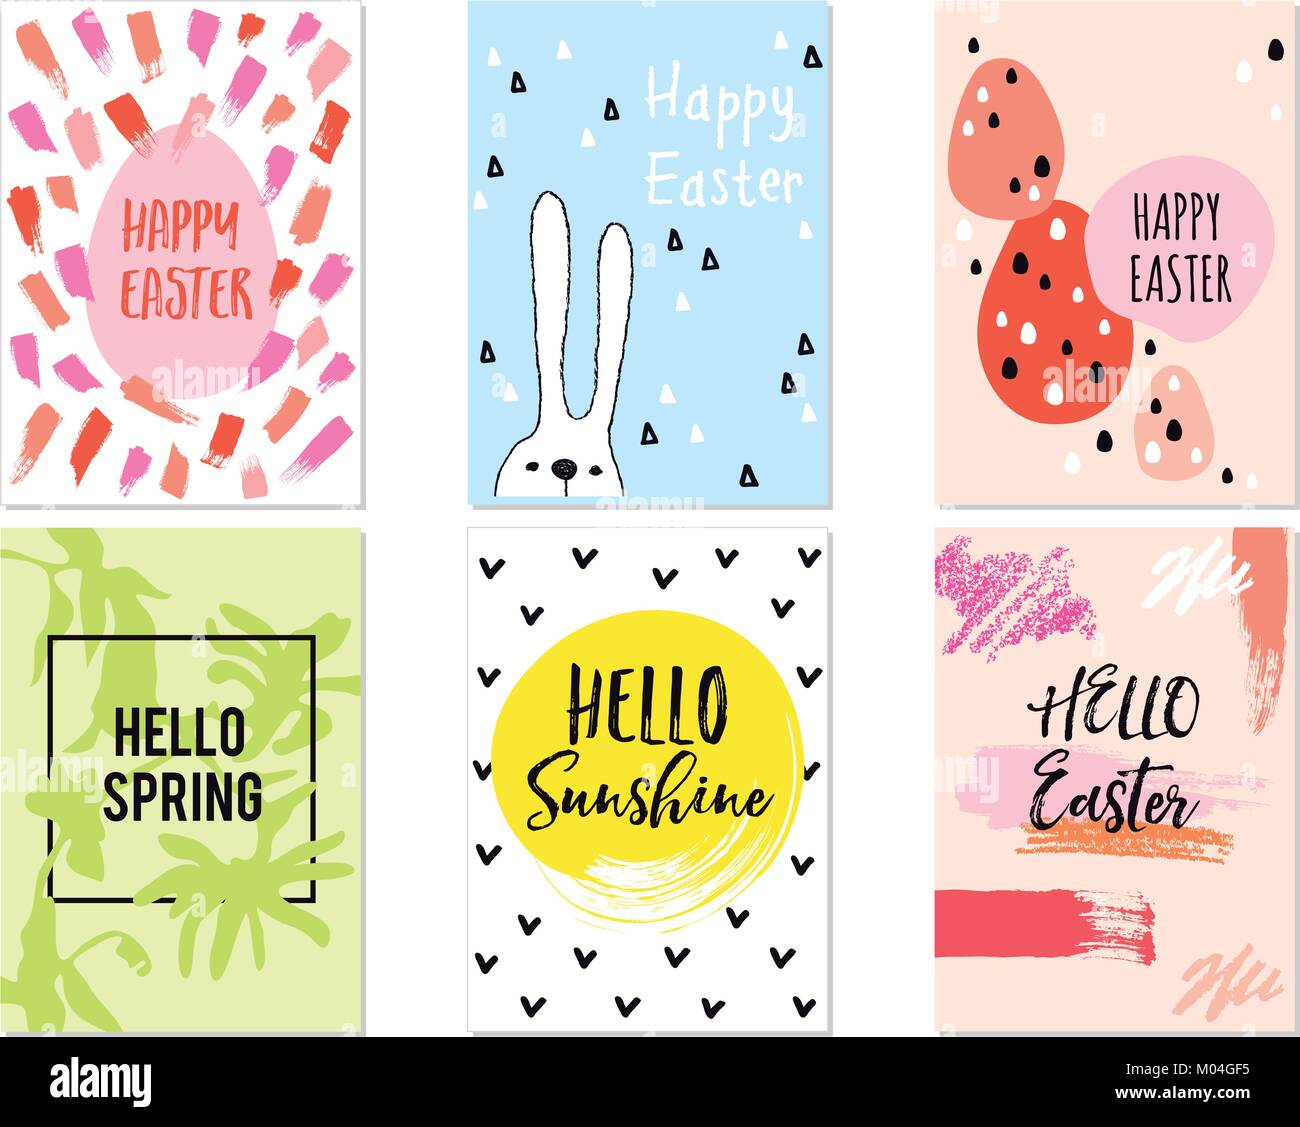 Modern, minimalist Easter cards with hand-drawn graphic design elements, vector set Stock Vector